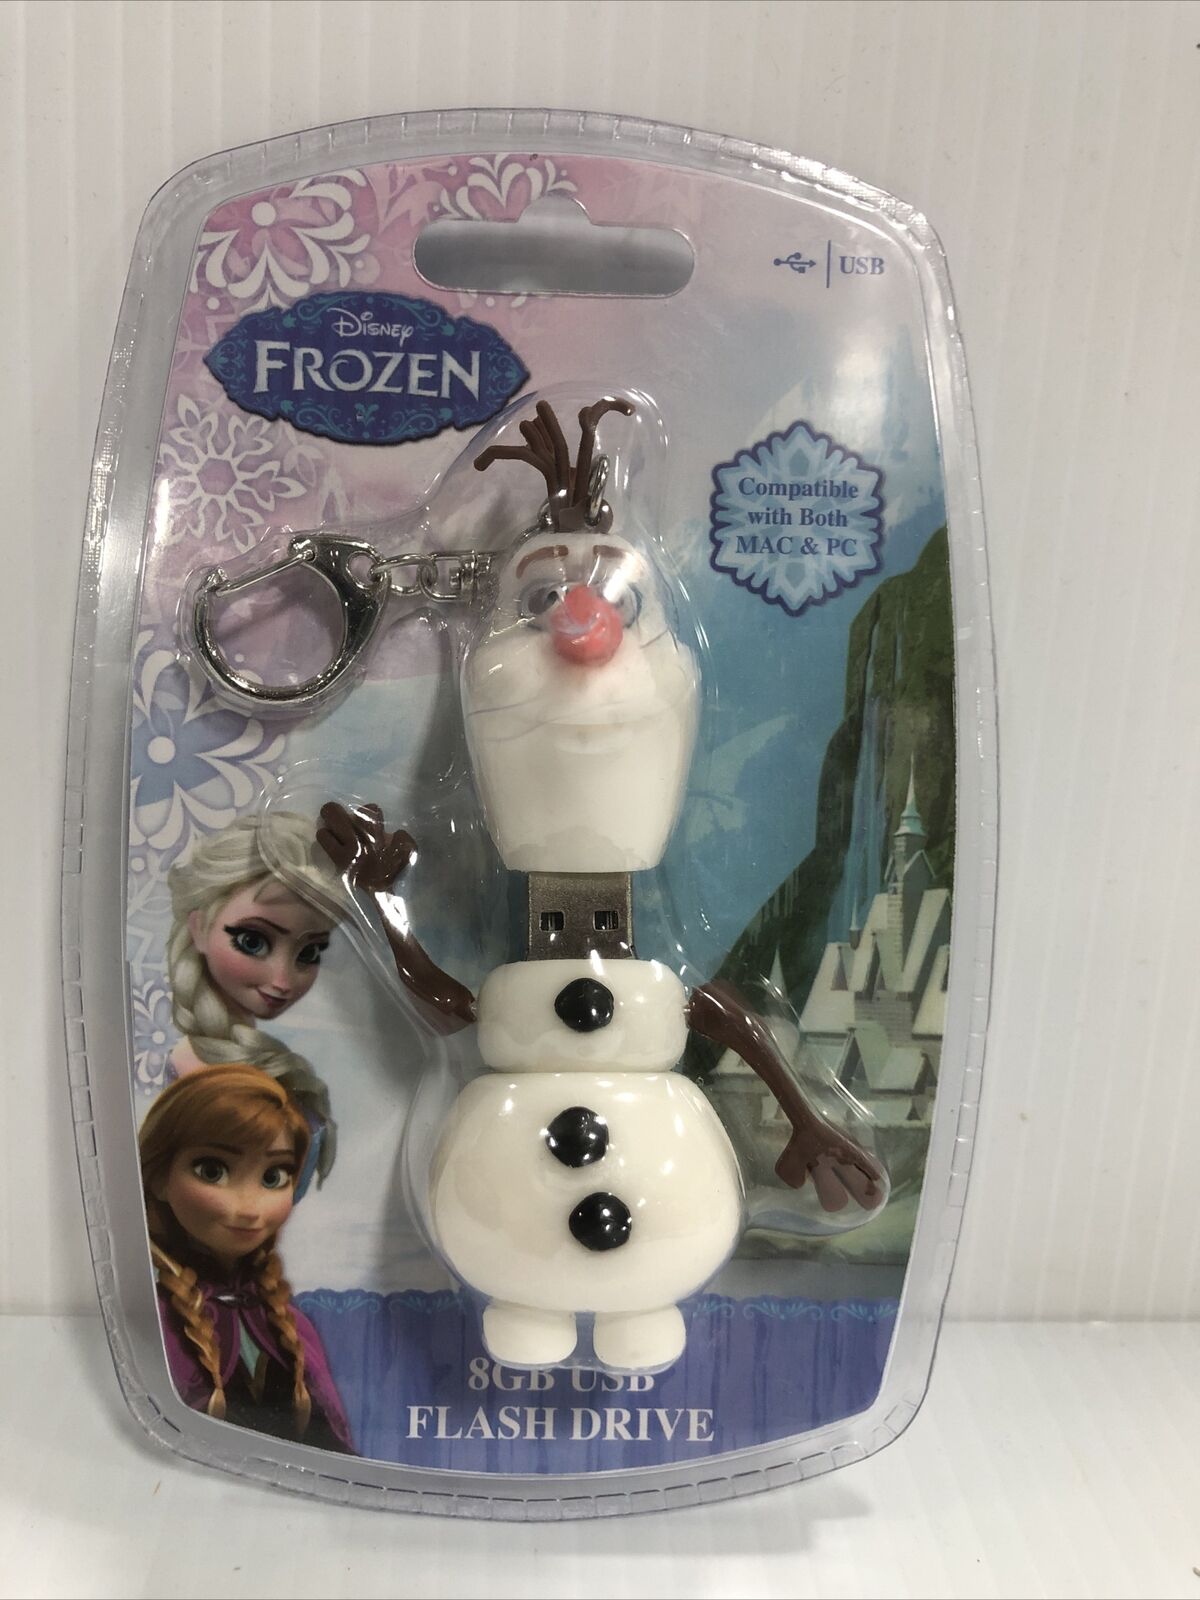 DISNEY FROZEN OLAF 8GB USB FLASH DRIVE FOR MAC & PC - NEW IN PACKAGE